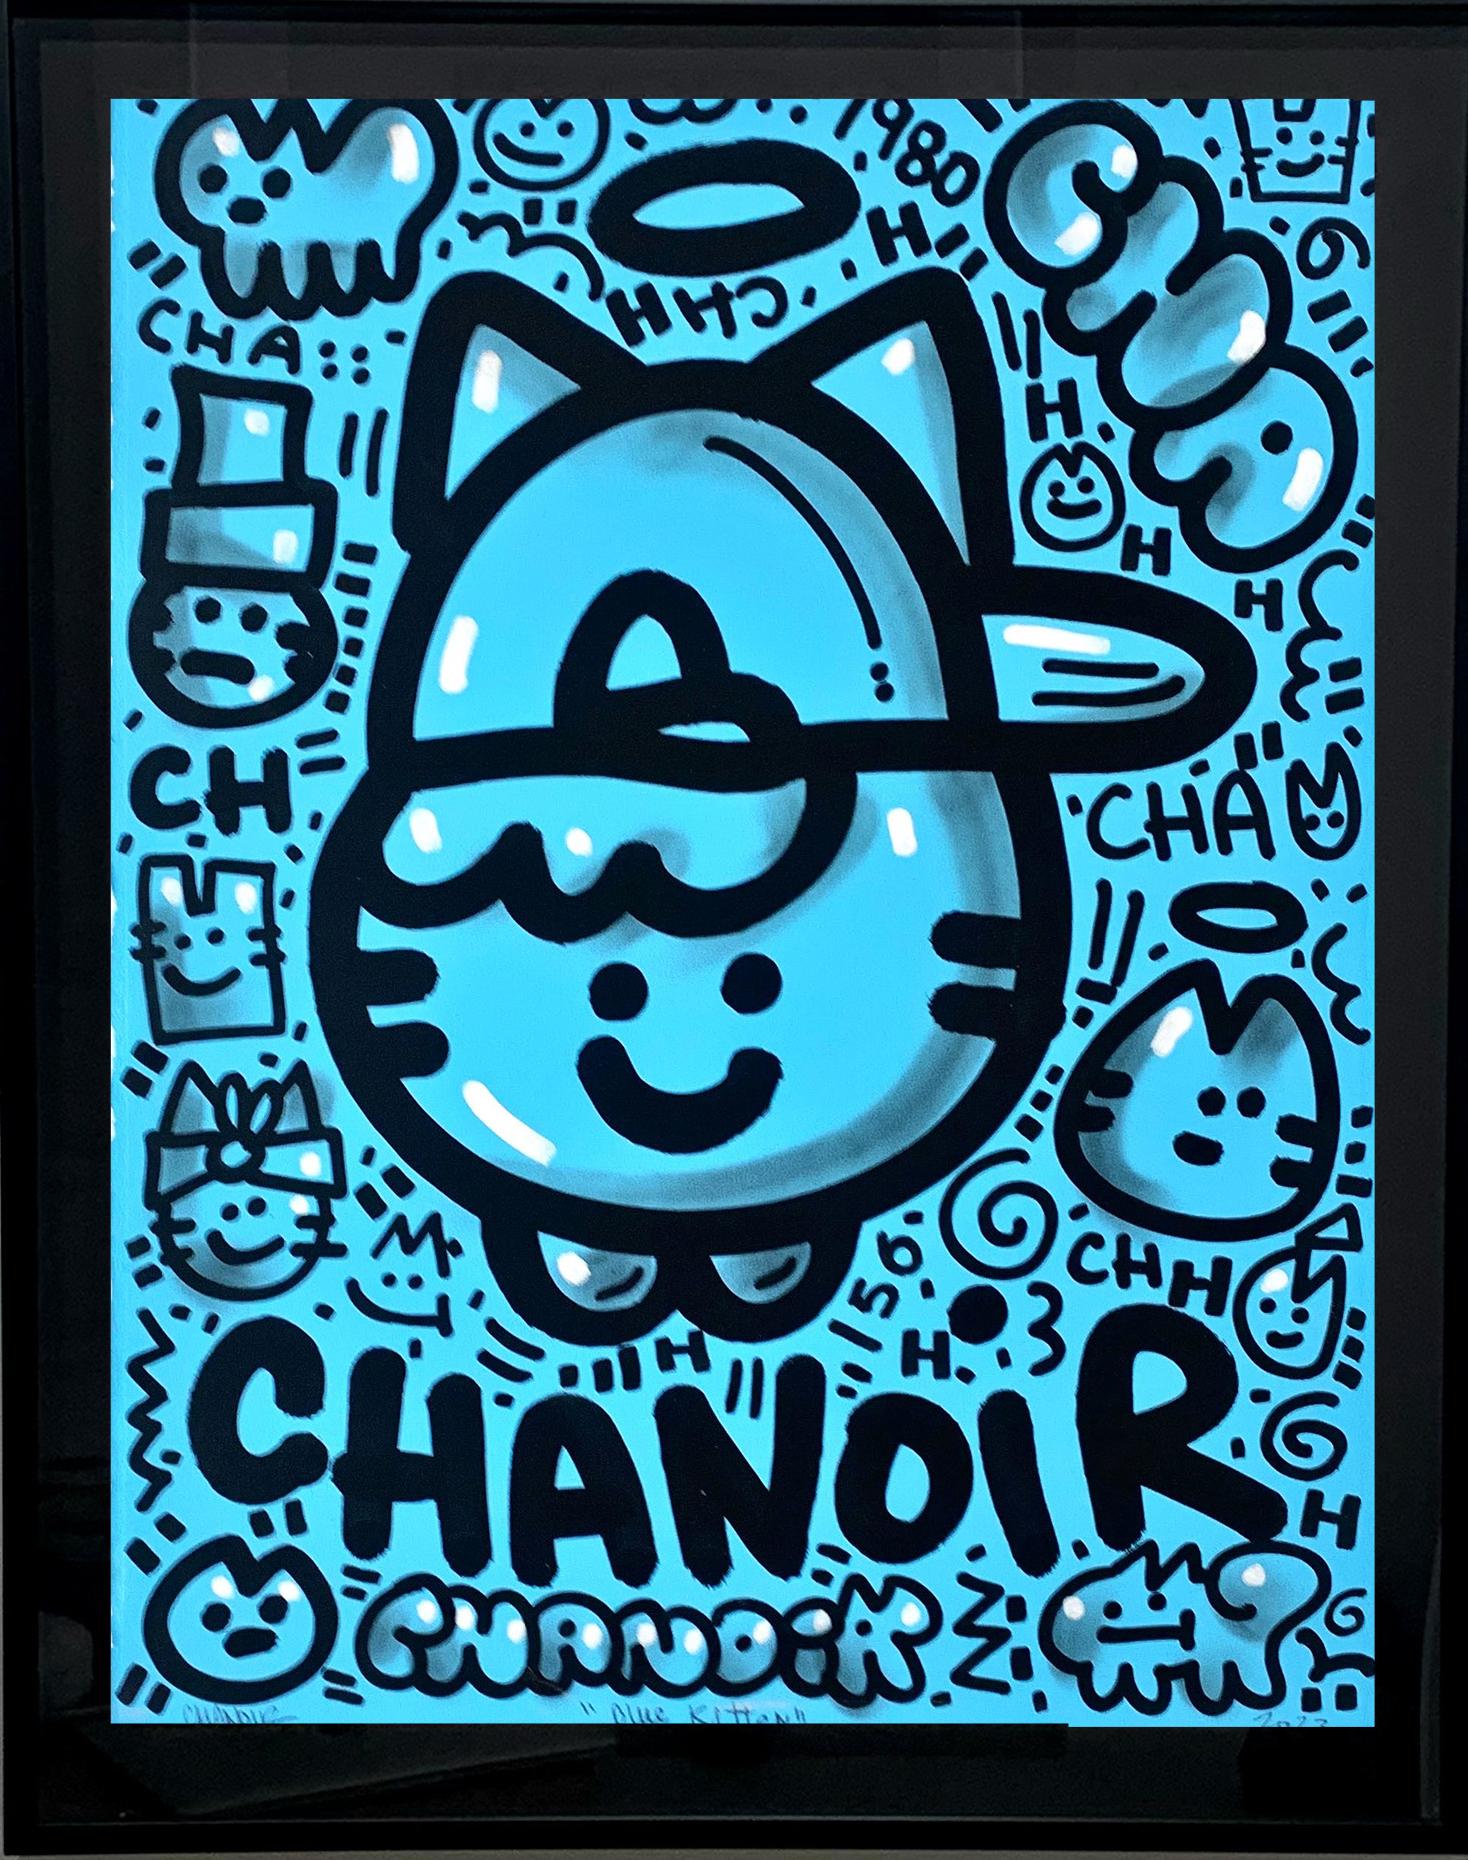 BLUE KITTEN by CHANOIR, French Urban Artist, Acrylic and Spray on Paper